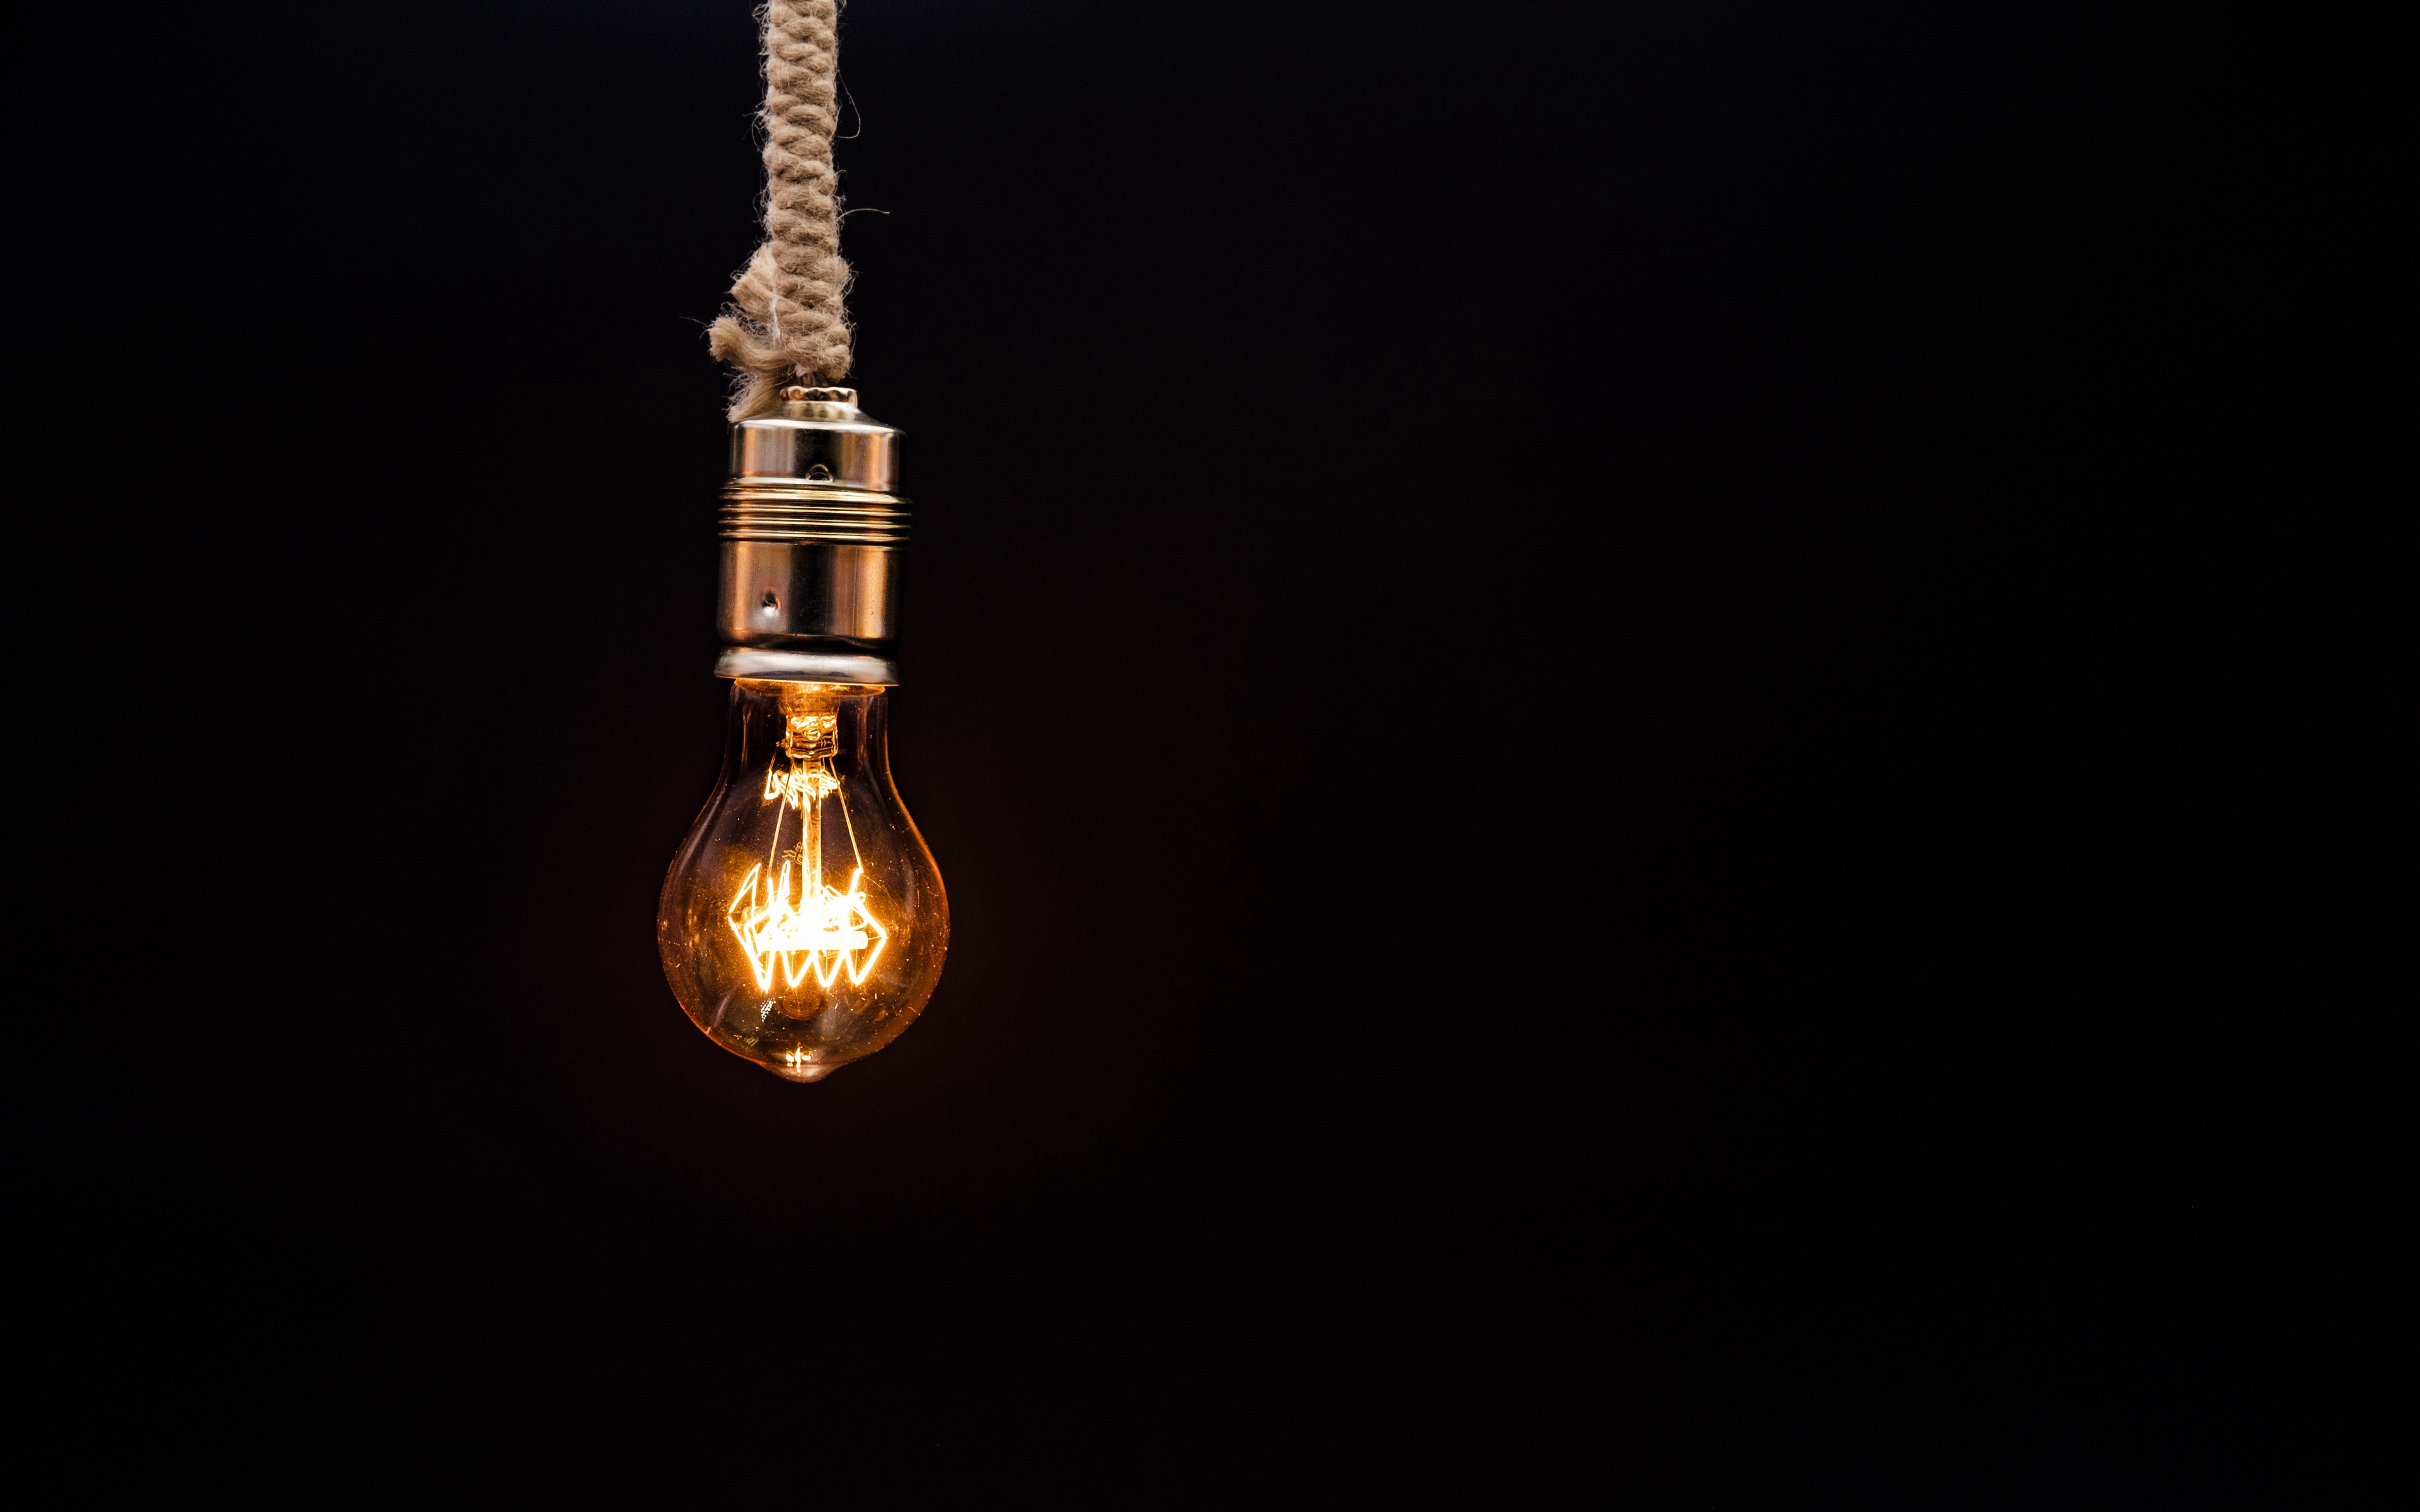 Download wallpaper 3840x2400 bulb, lighting, rope, electricity